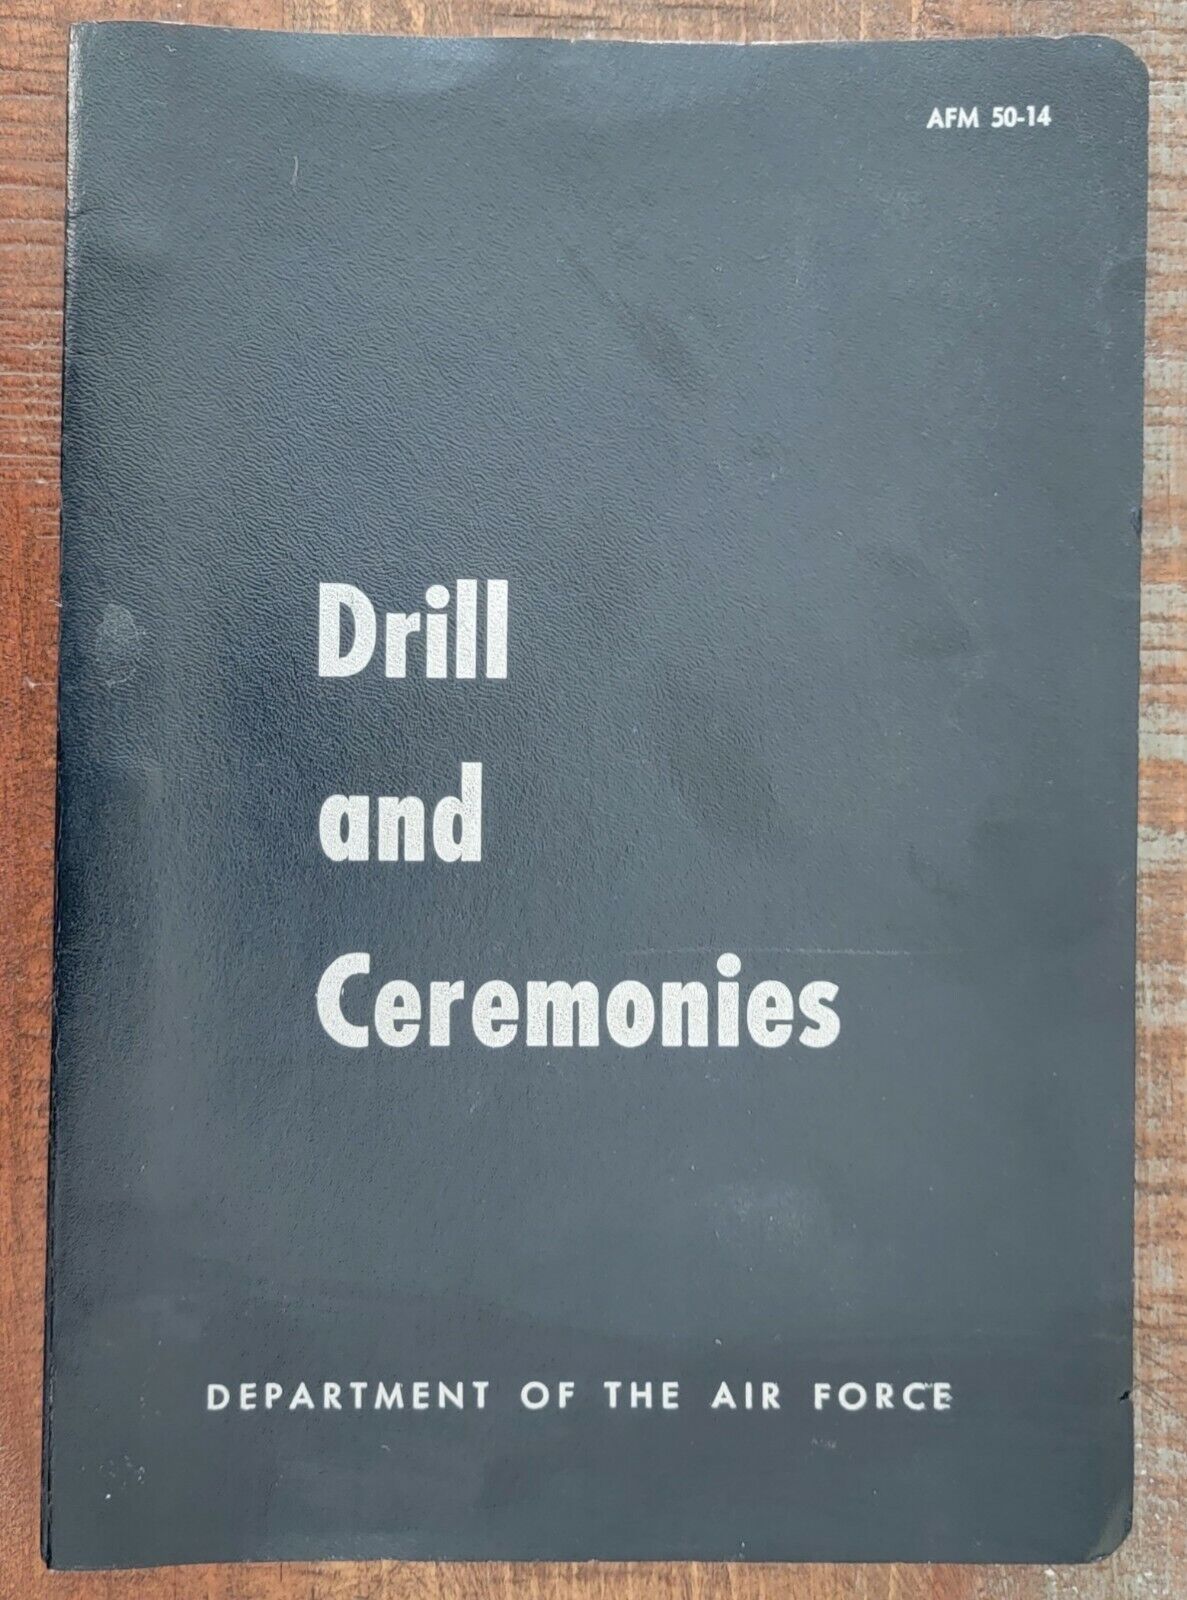 1953 Air Force Drill and Ceremonies Manual AFM 50-14